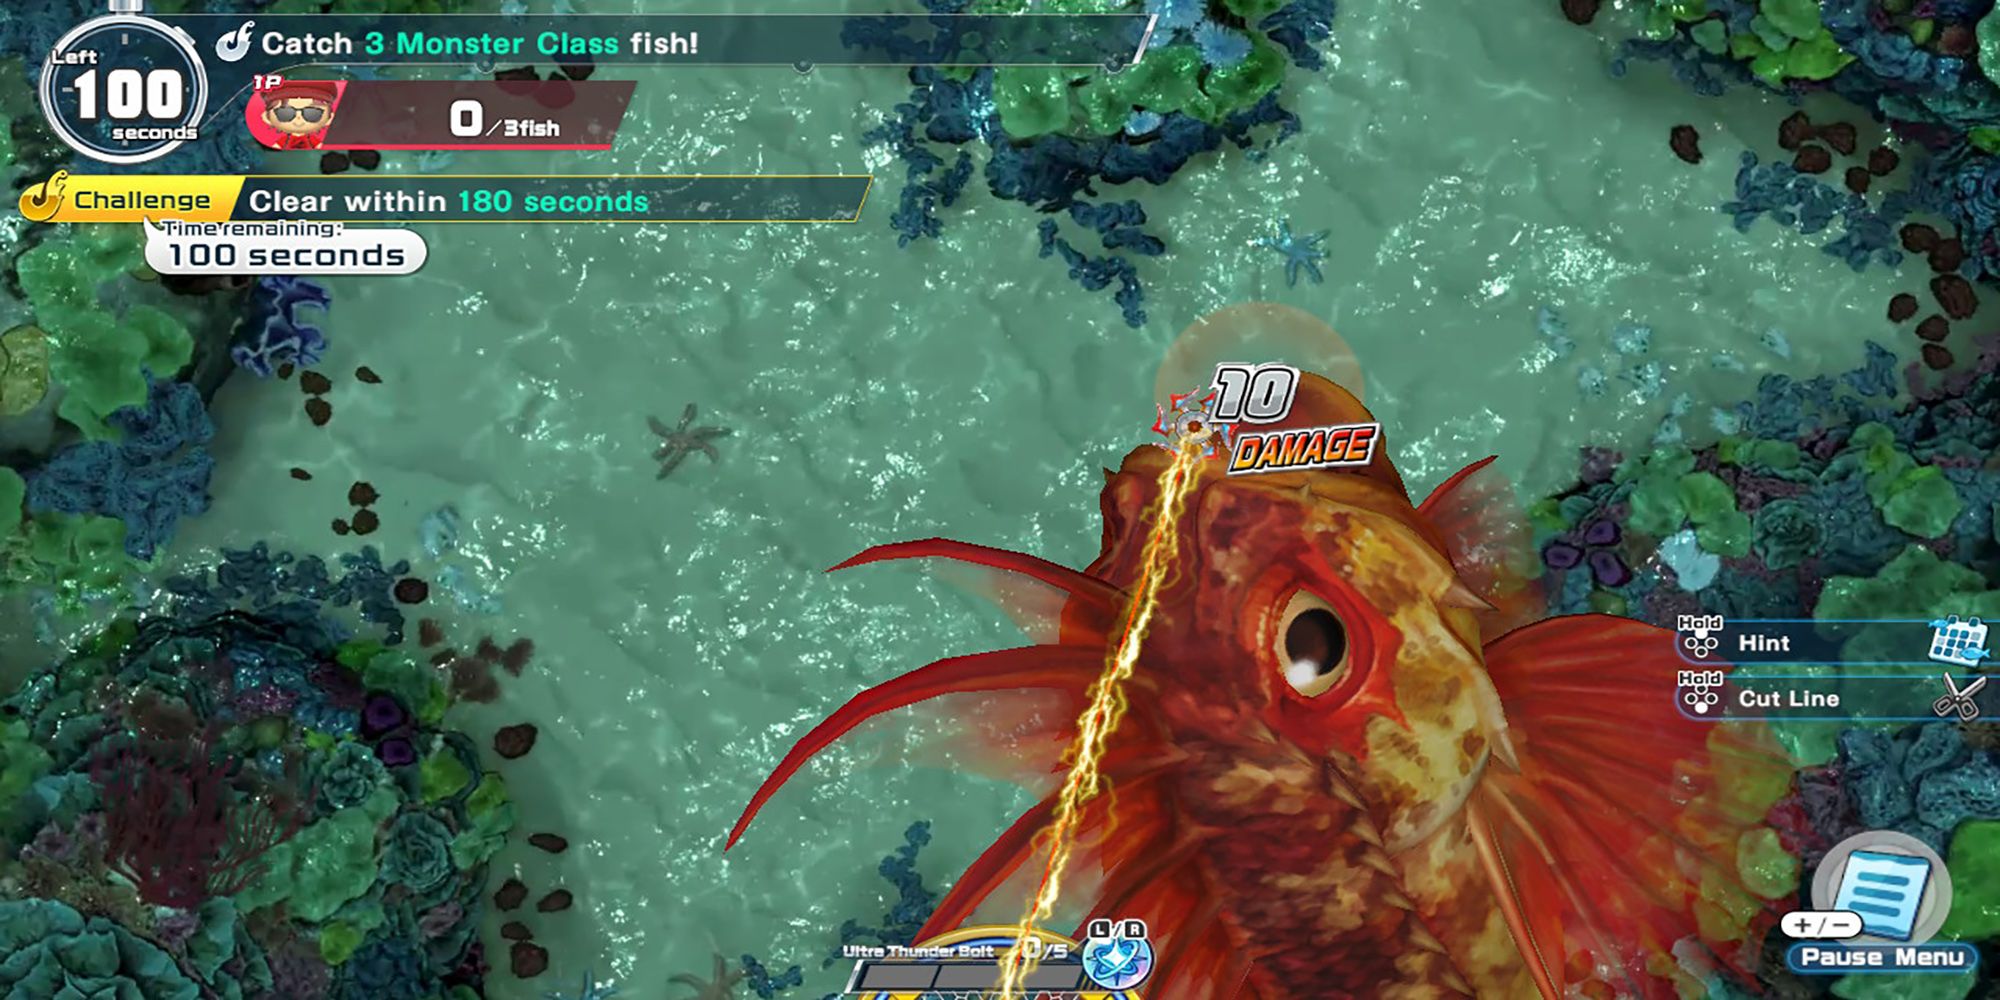 A Monster Class fish gets shocked with a thunderbolt at the Coral Reef in Ace Angler: Fishing Spirits.